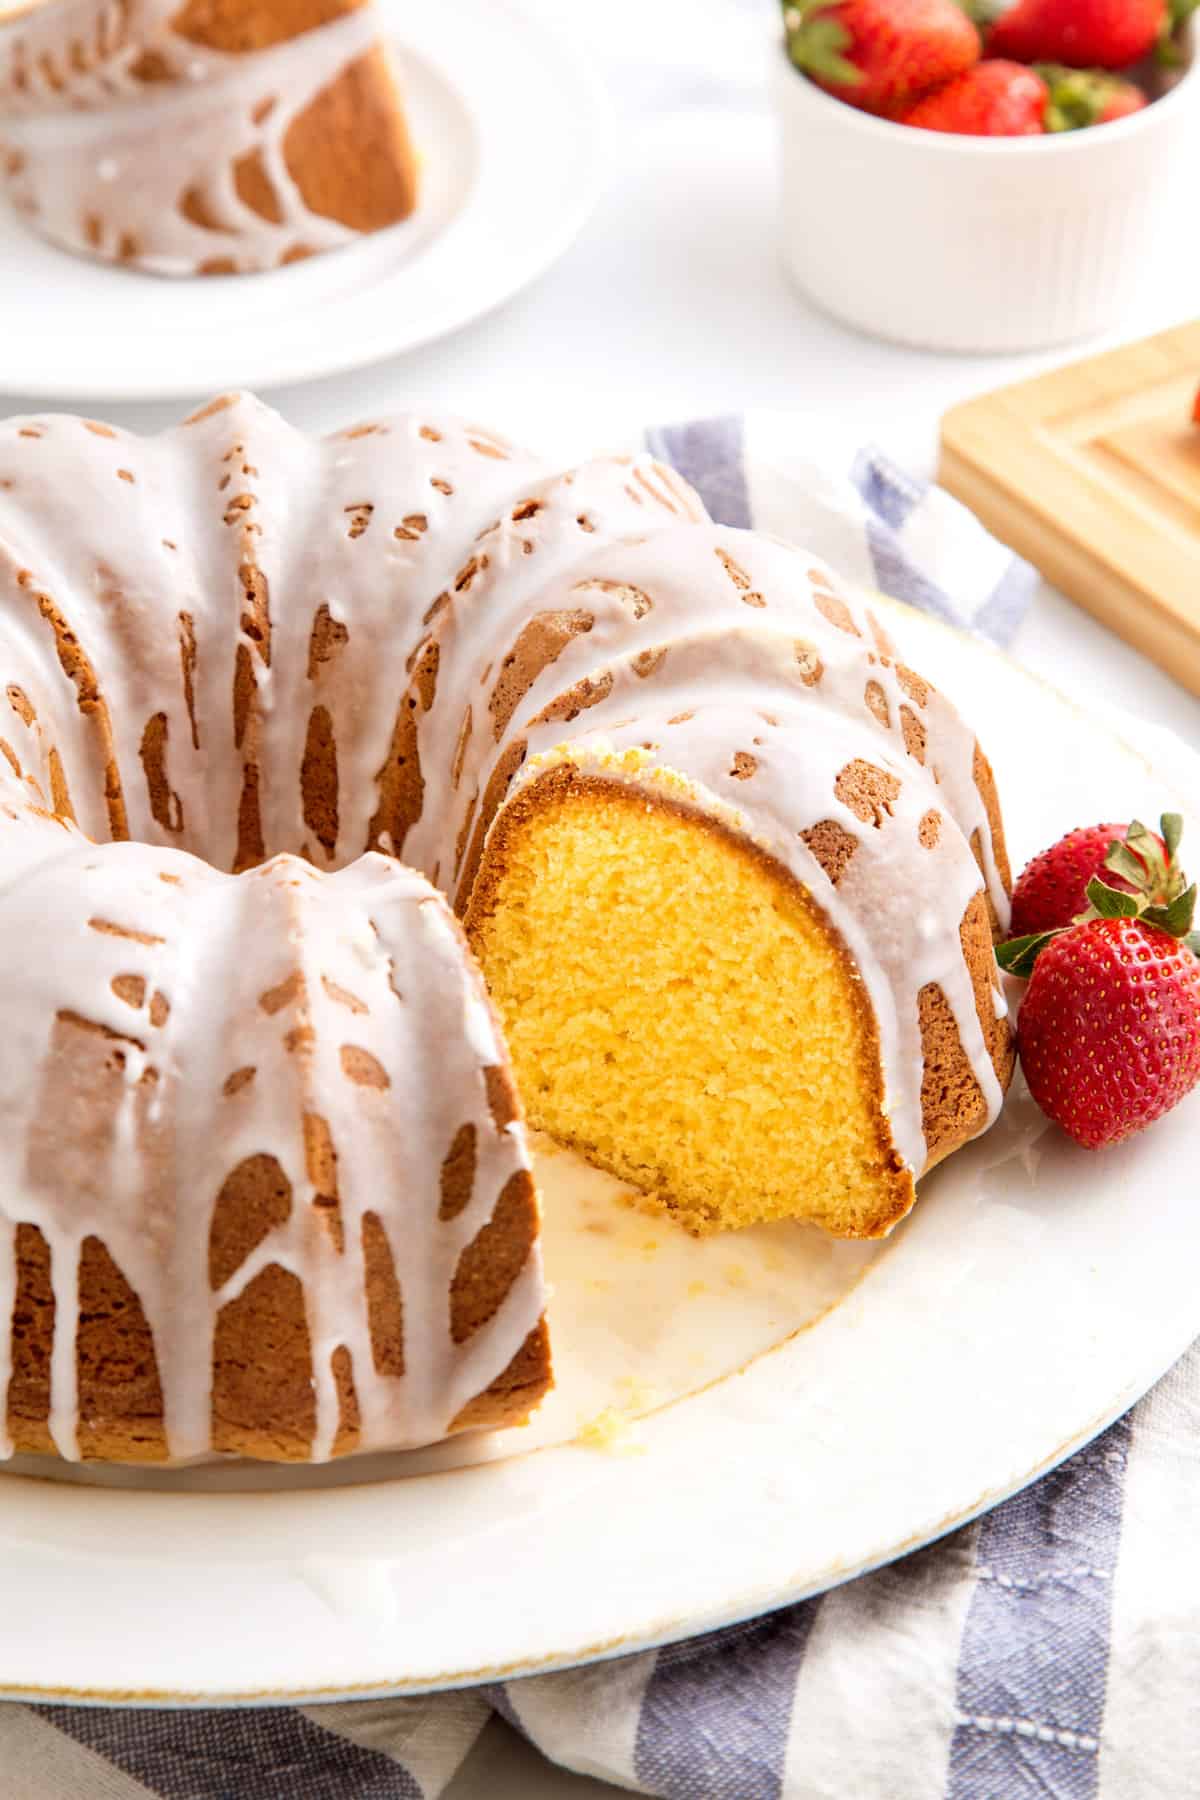 cake mix pound cake in the shape of a bundt, topped with a lemon glaze with two fresh strawberries on the side all served on a white round plate